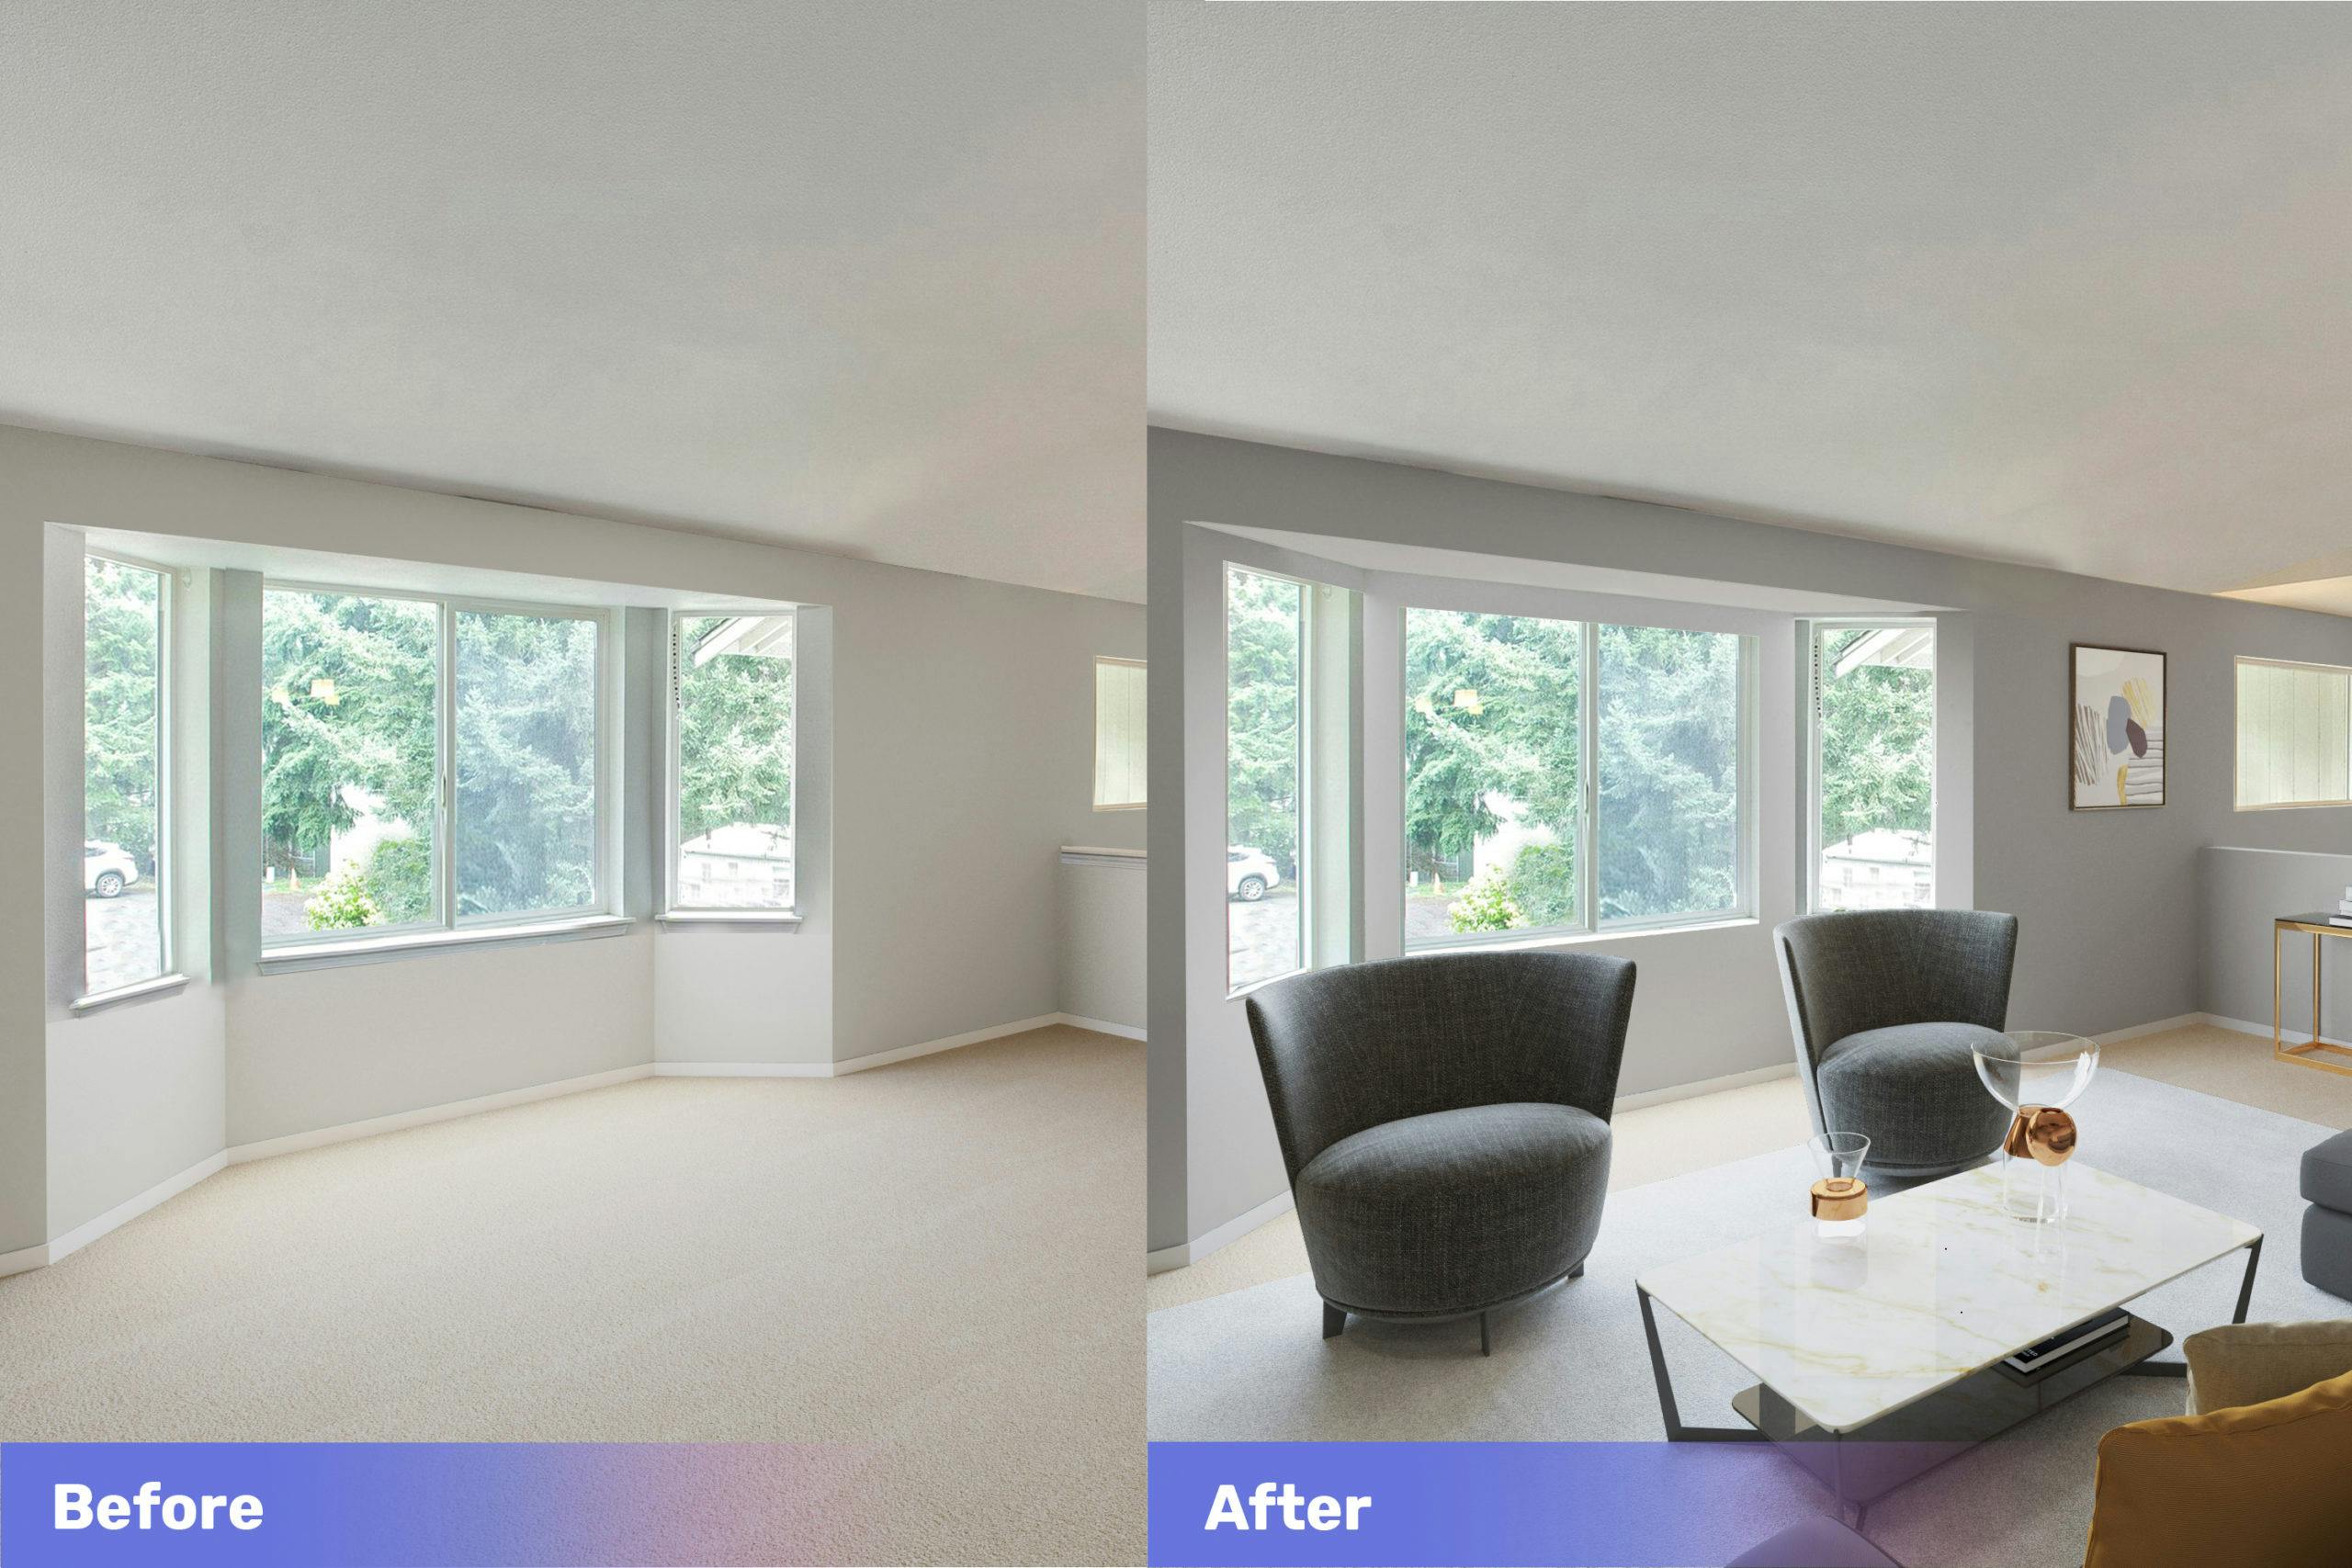 5 Reasons Why You Should Choose Phixer For Real Estate Photo Editing